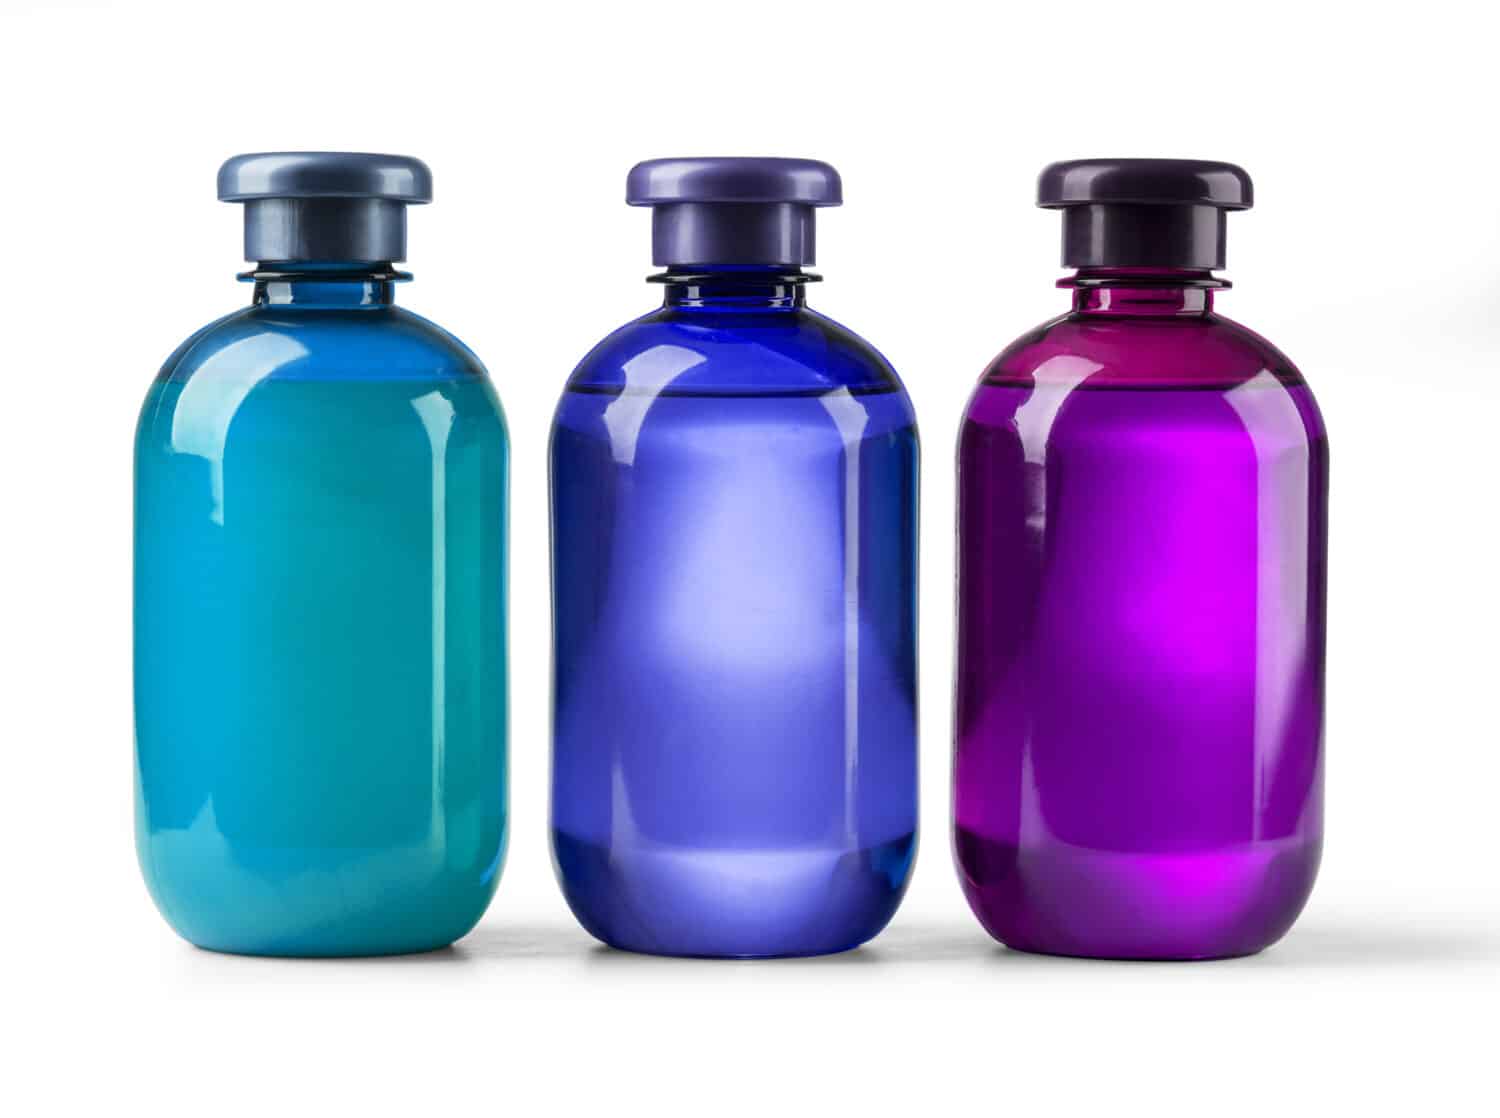 three Shampoo bottle on a white background with clipping path